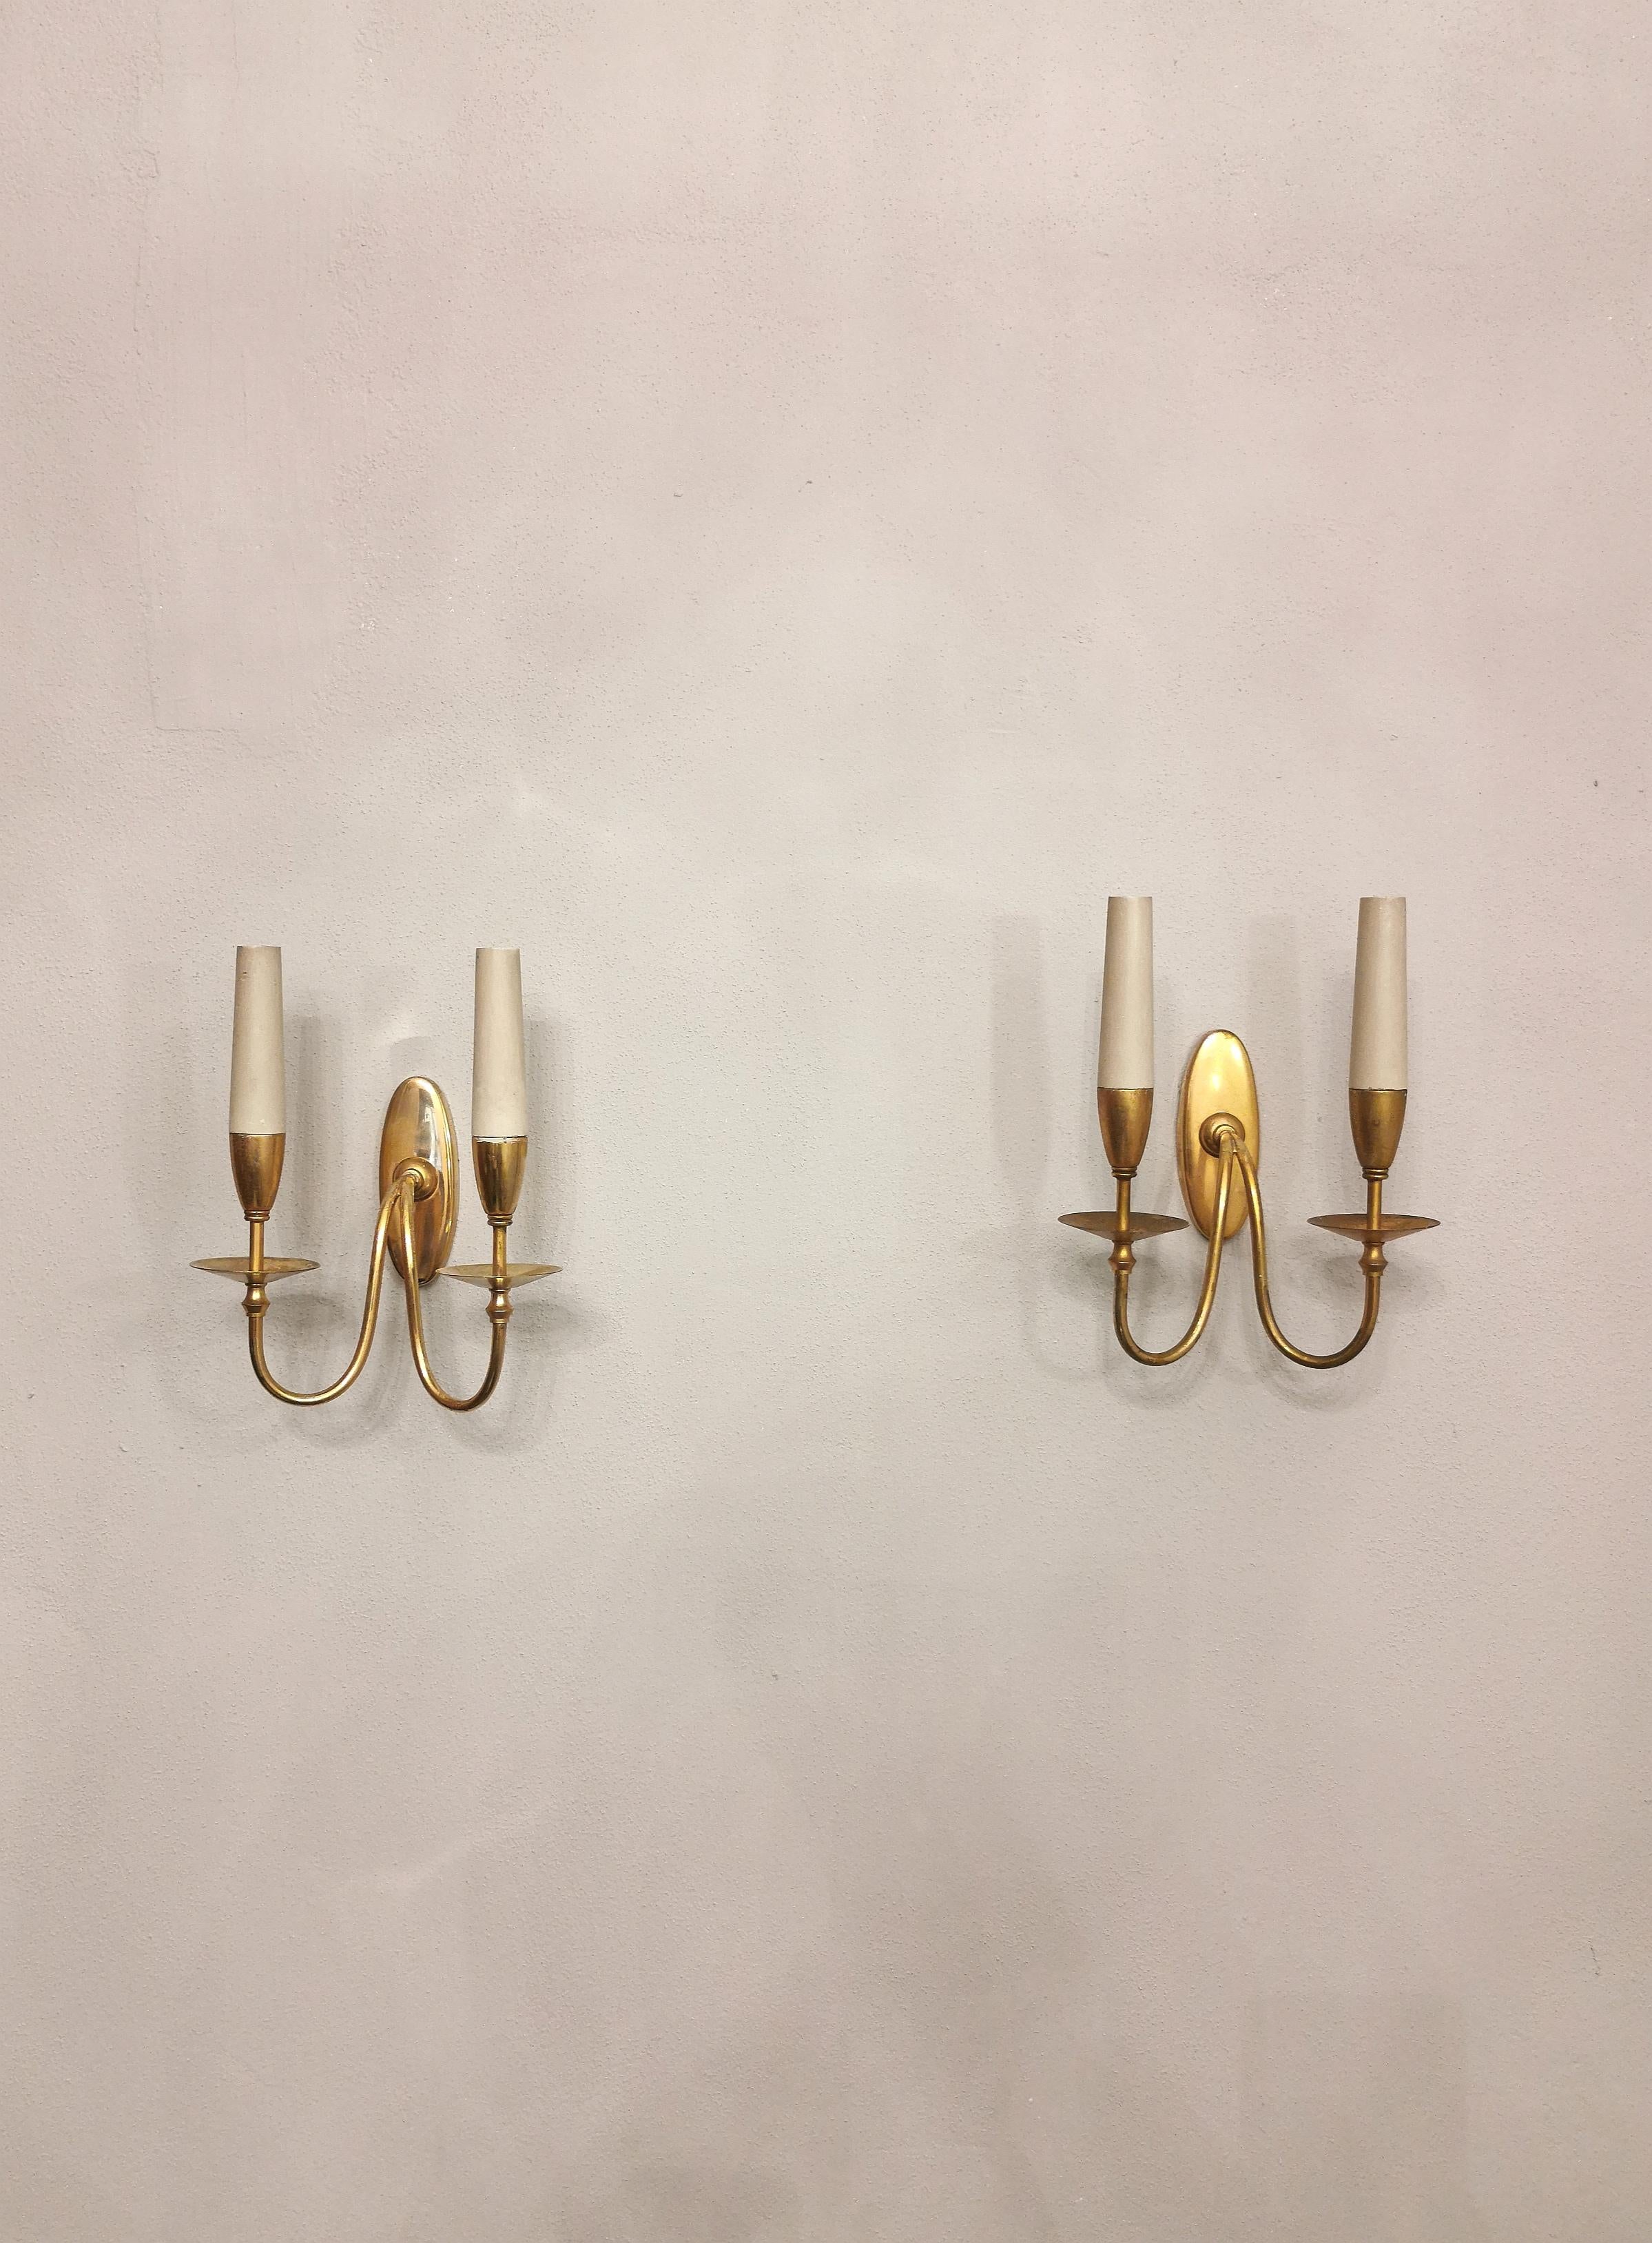 Elegant set of 3 wall lamps from the 1940s designed by the renowned Italian designer Gio Ponti. Each single lamp has an oval-shaped wall housing with a stamp behind it and two curved brass arms that support two 1-light E14 lamp holders in enamelled